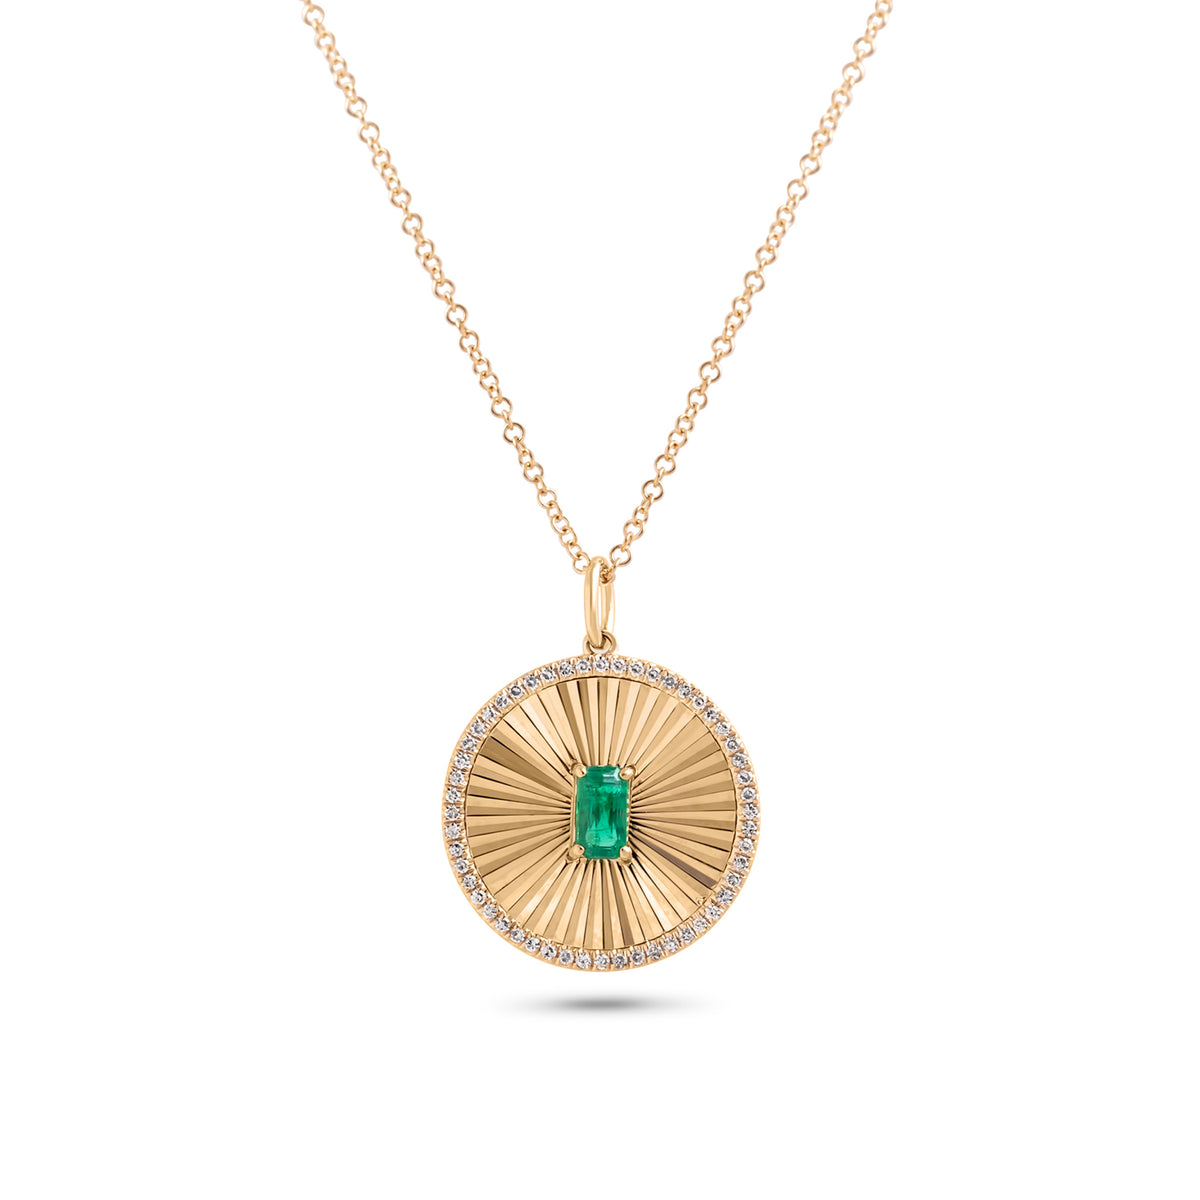 14k yellow gold fluted diamond disc pendant with emerald cut emerald